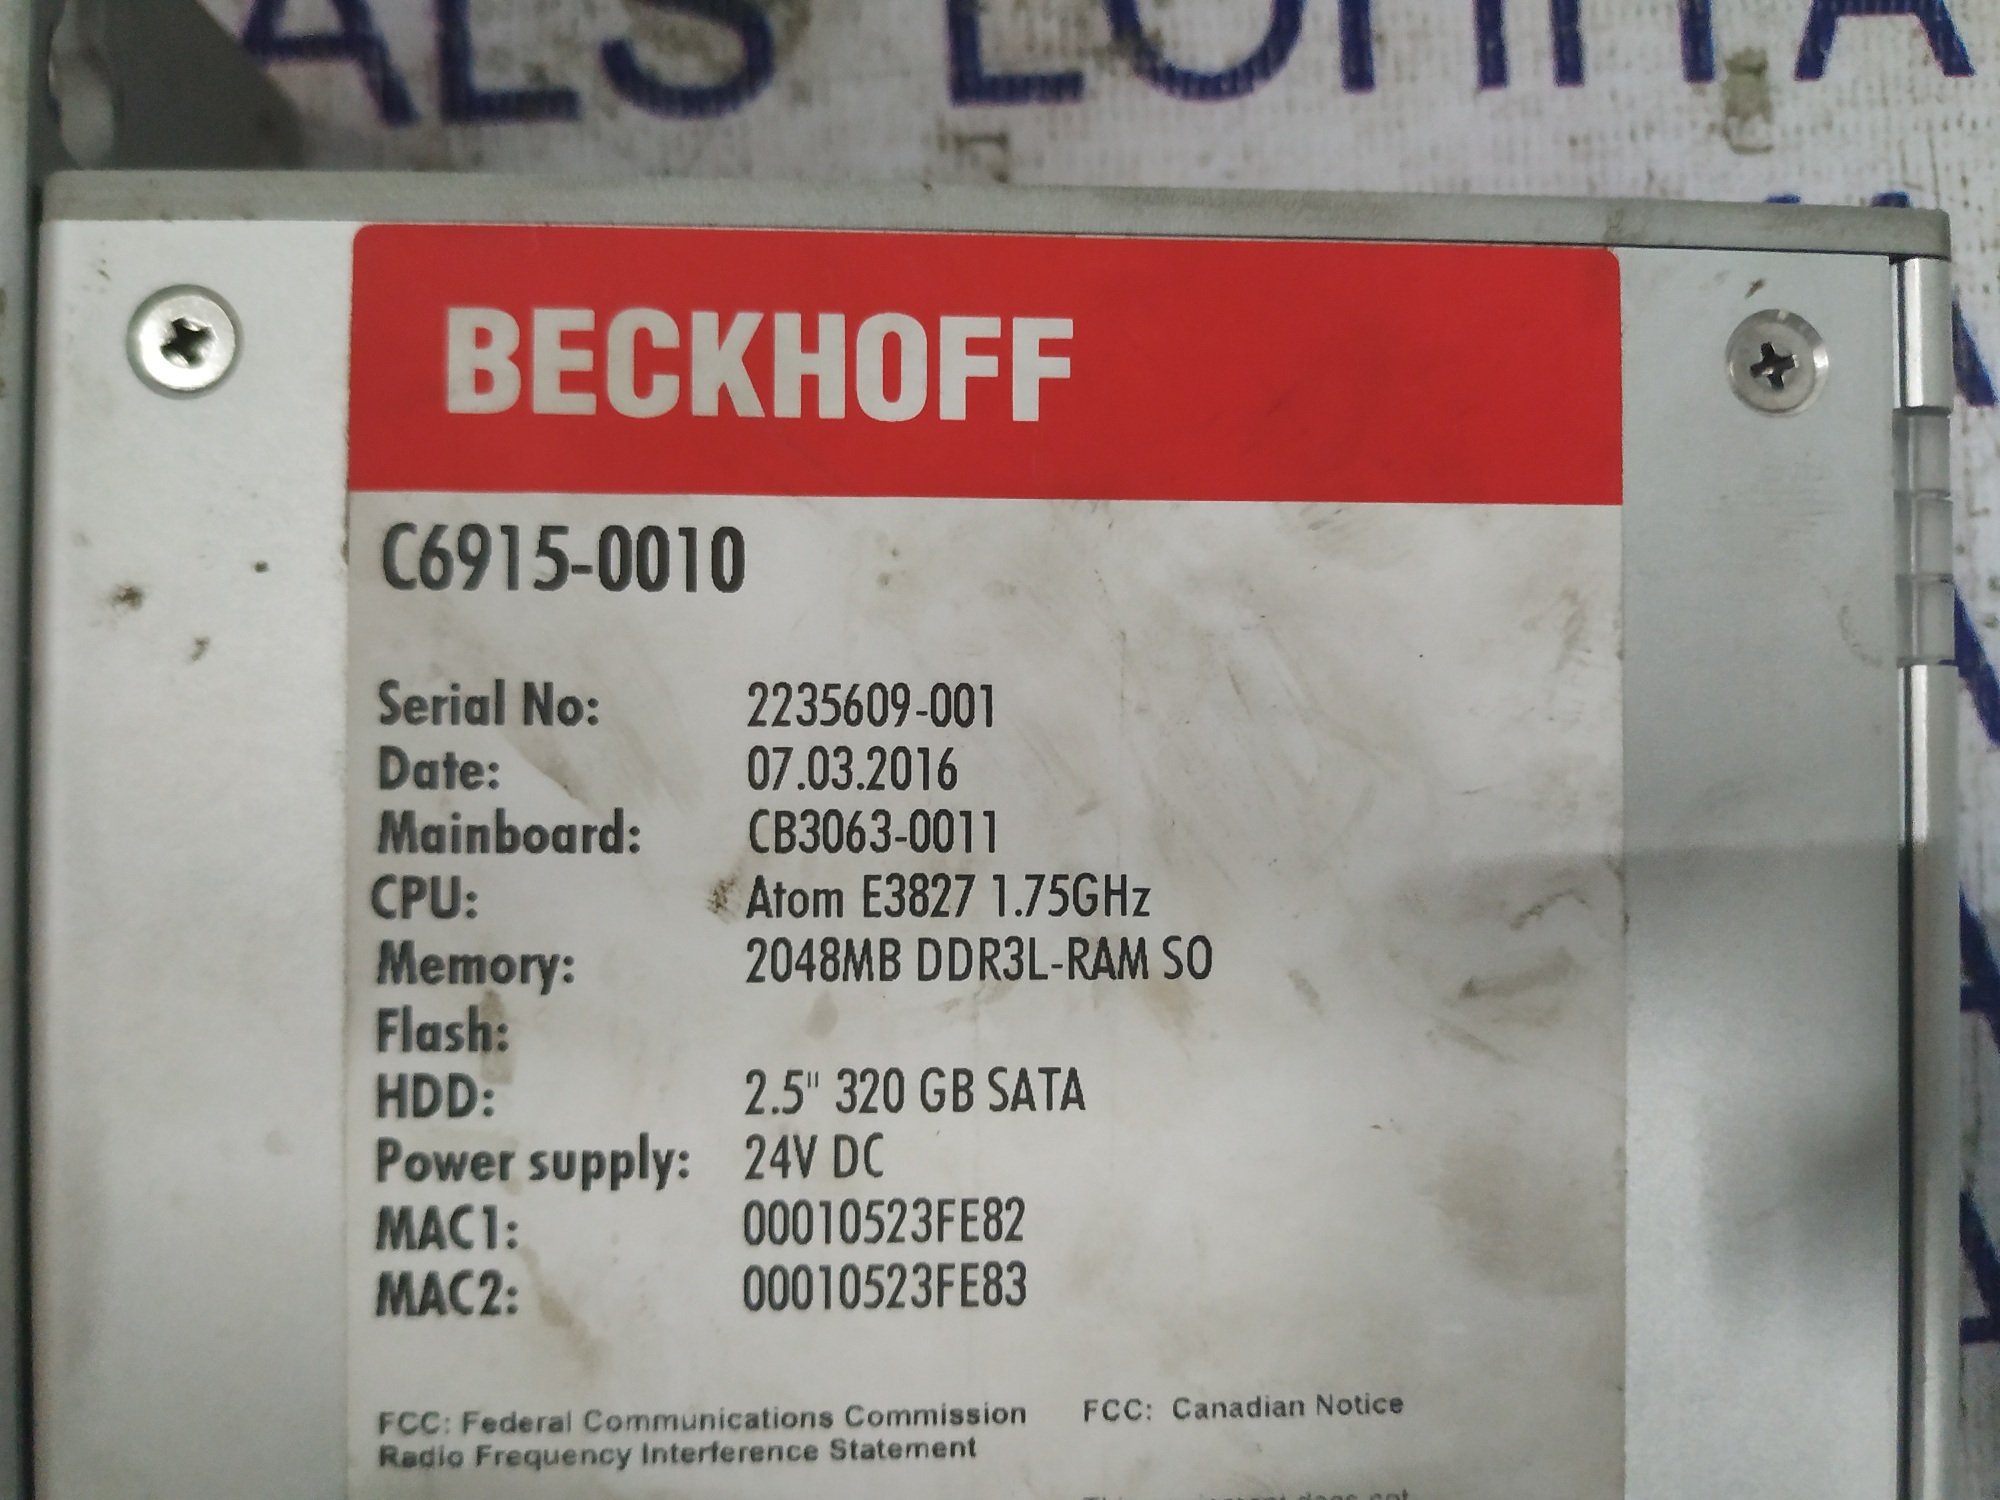 BECKHOFF FANLESS CONTROL CABINET INDUSTRIAL PC C6915-0010